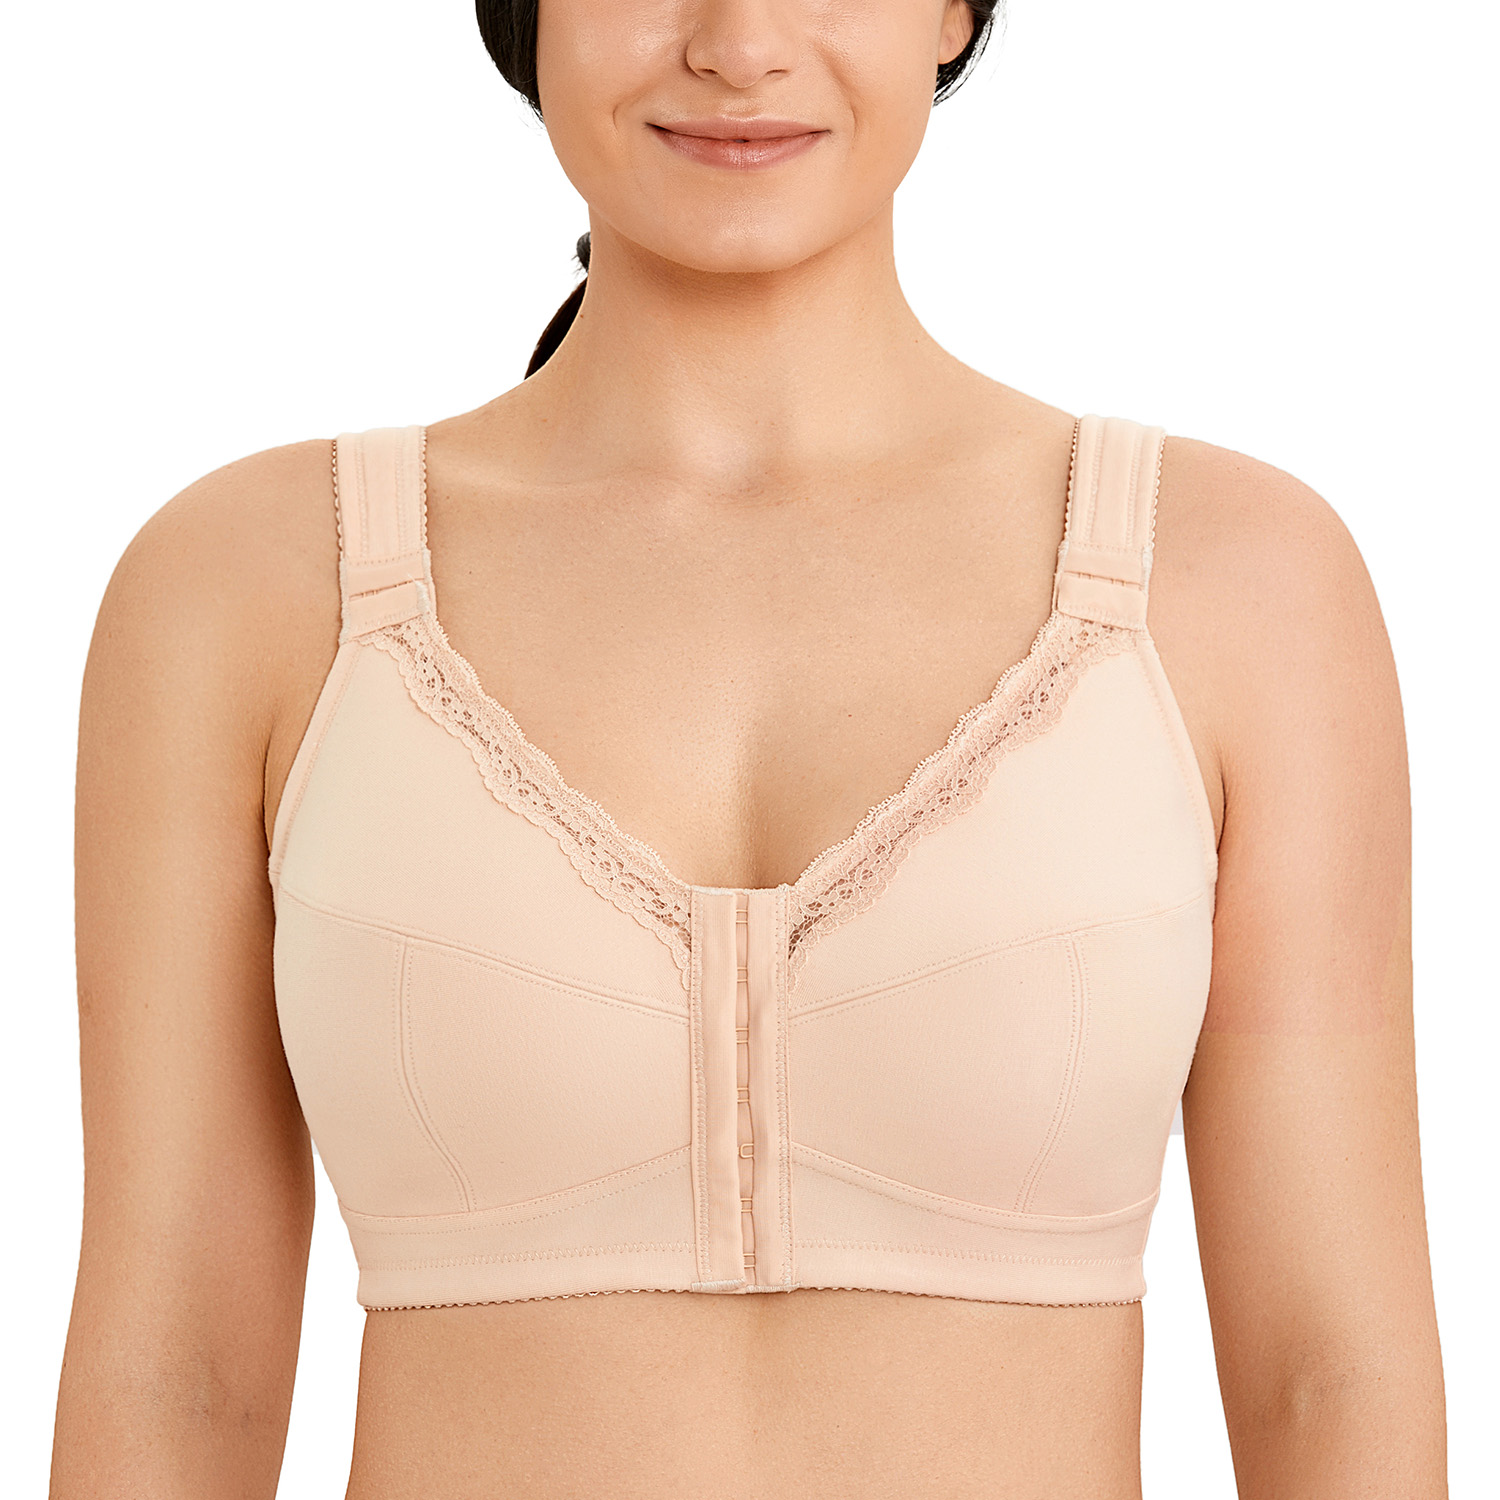 LAUDINE Womens Plus Size Back Support Comfort Front Closure Wireless Bra